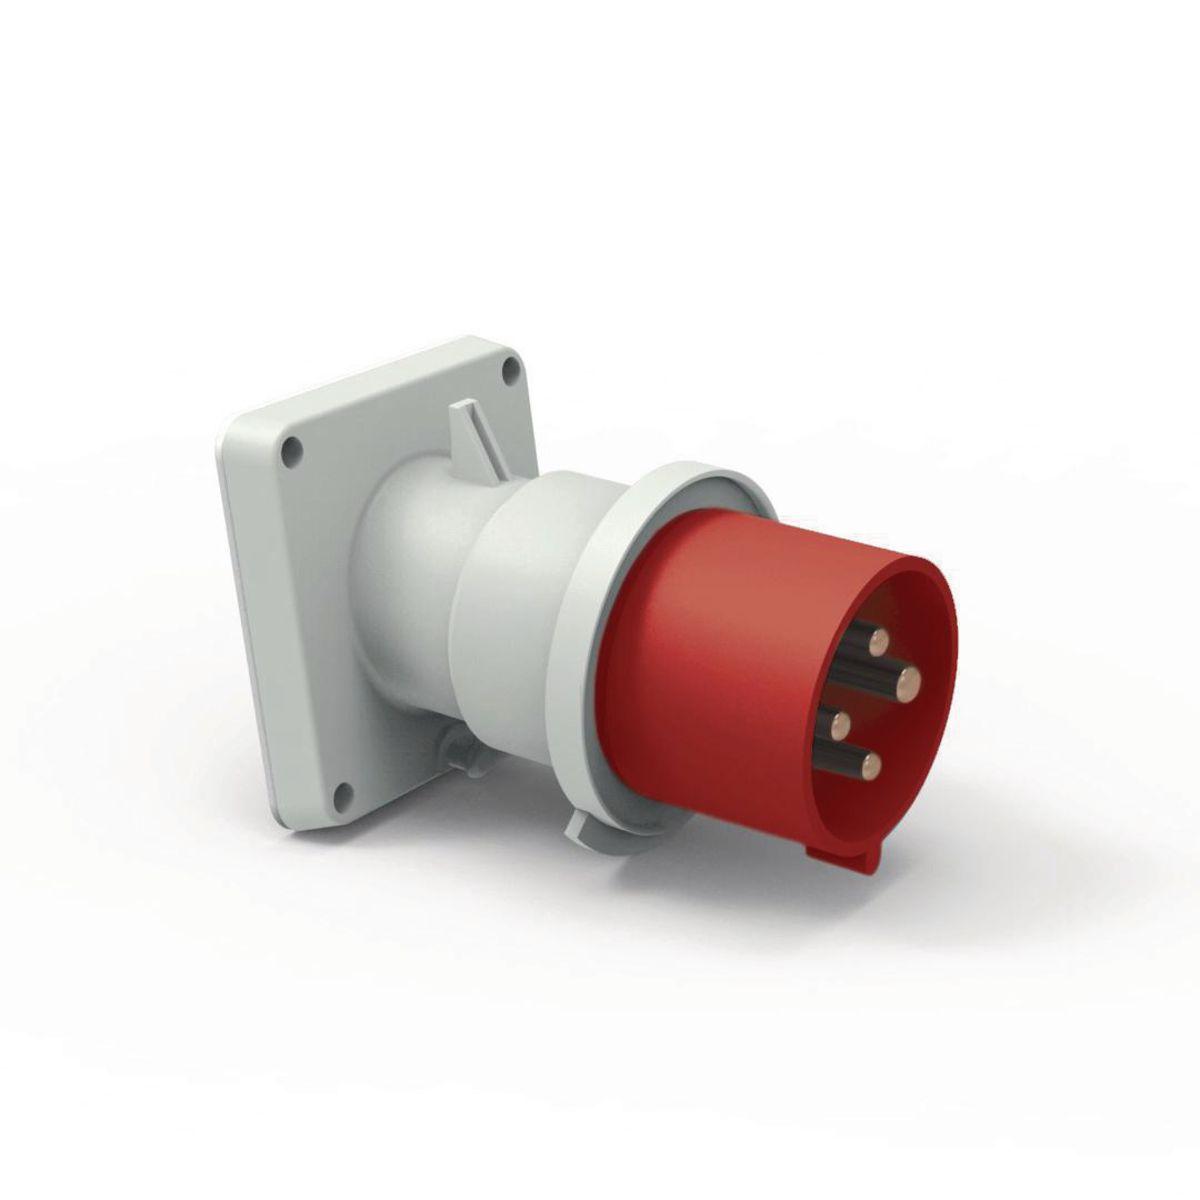 Hubbell C420B6SA Heavy Duty Products, IEC Pin and Sleeve Devices, Hubbell-PRO, Male, Inlet, 16/20 A  380-415 VAC, 3-POLE 4-WIRE, Red, Splash Proof  ; IP44 environmental ratings ; Impact and corrosion resistant insulated non-metallic housing ; Sequential contact engagement